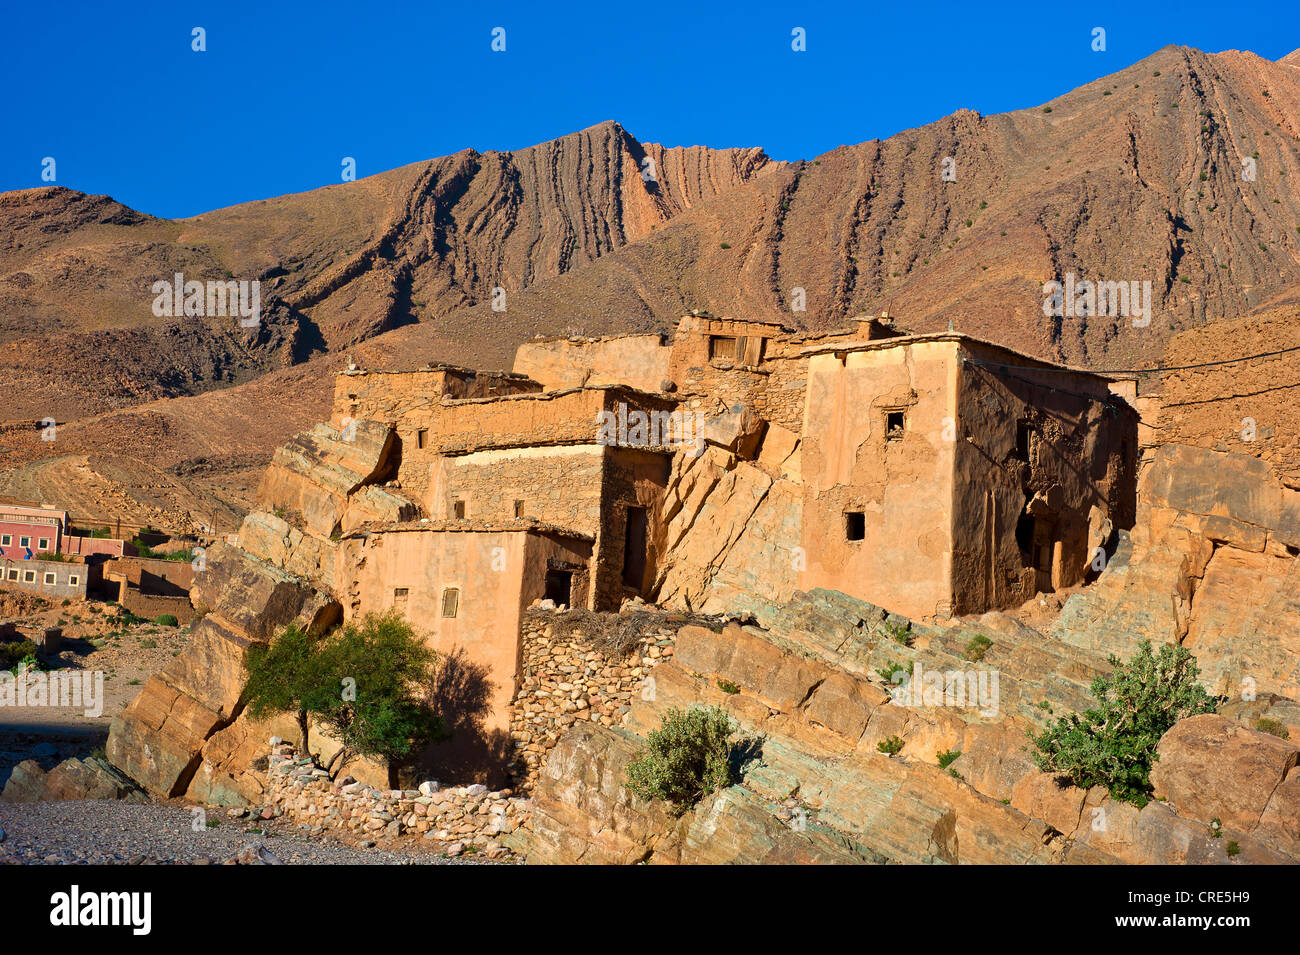 Mountain landscape in the valley of Ait Mansour with a few simple, mud-walled residential houses, Anti-Atlas mountain range Stock Photo